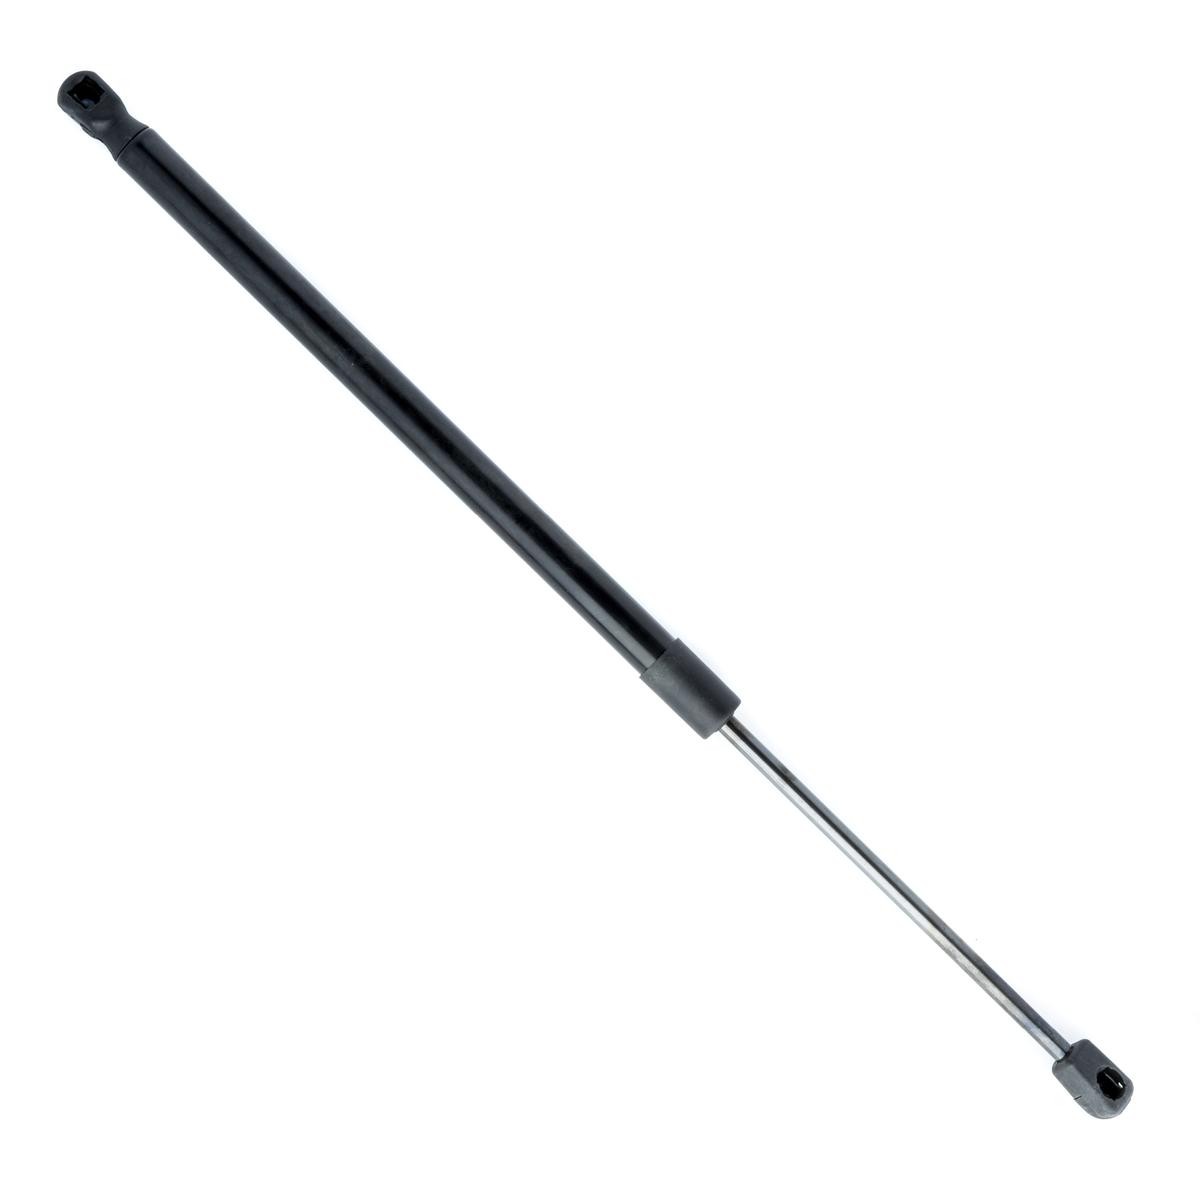 EINPARTS 770N, 505 mm Stroke: 170mm Gas spring, boot- / cargo area EP10600GS buy